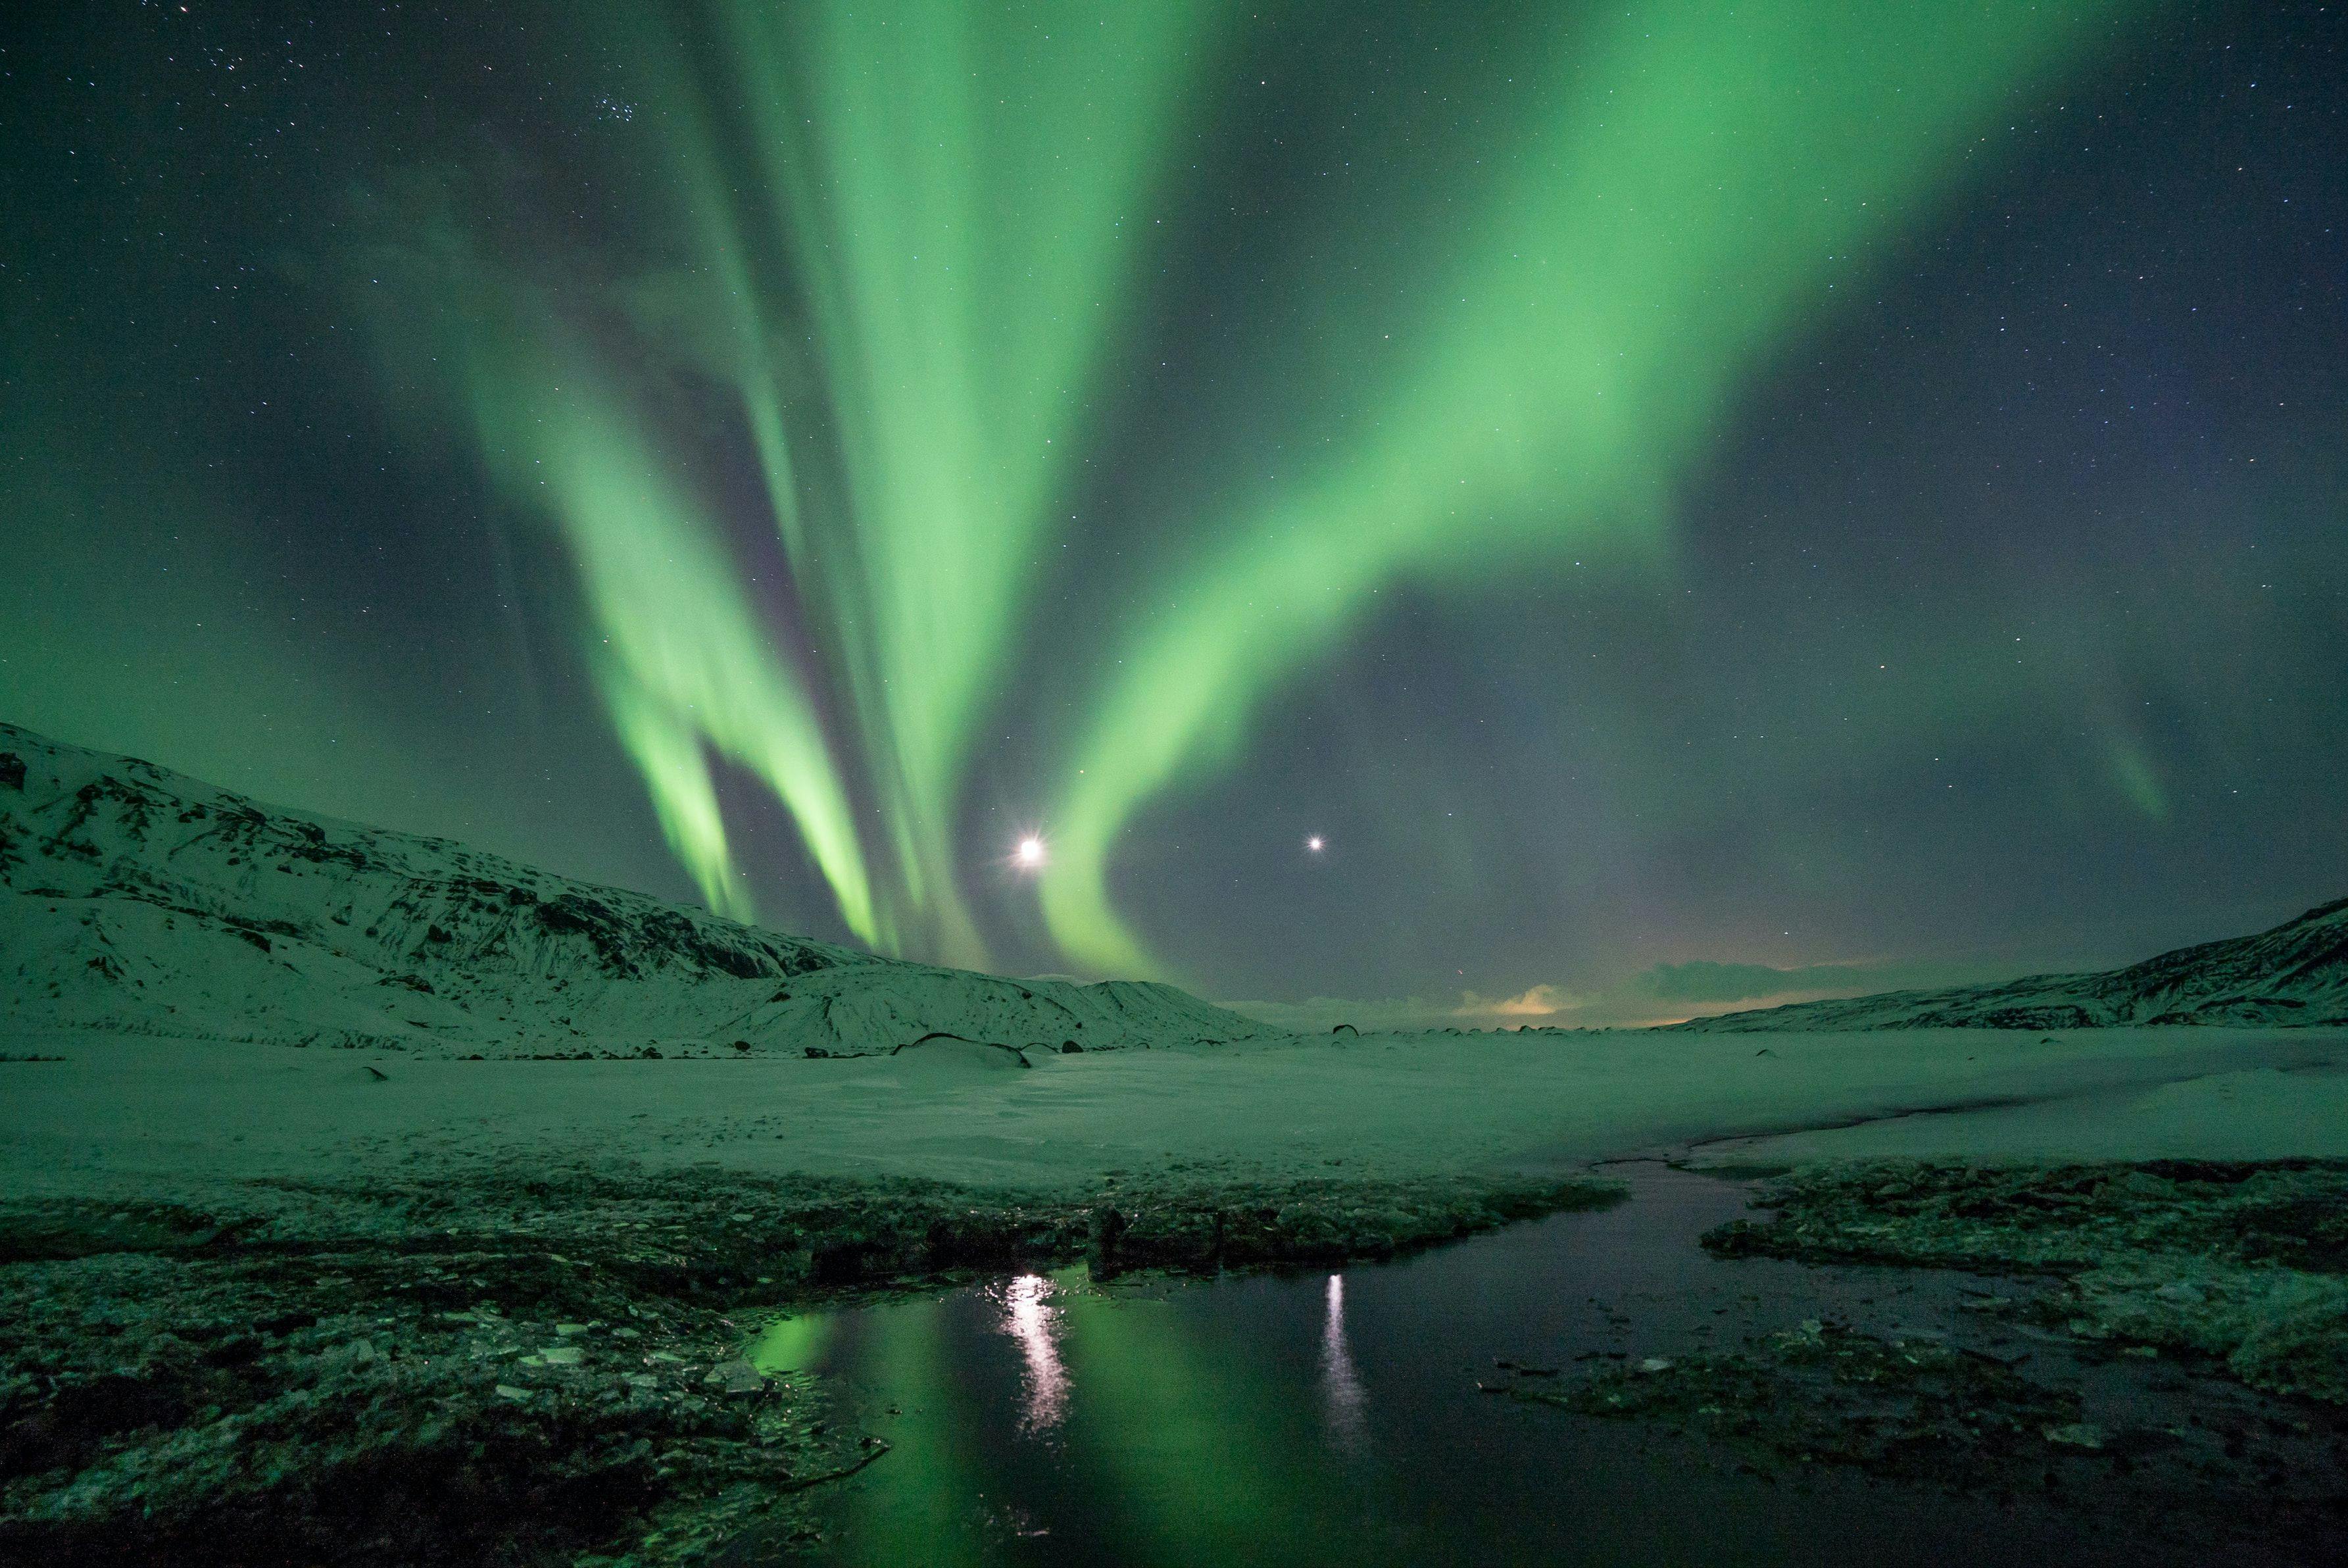 Northern lights in the sky in Iceland.